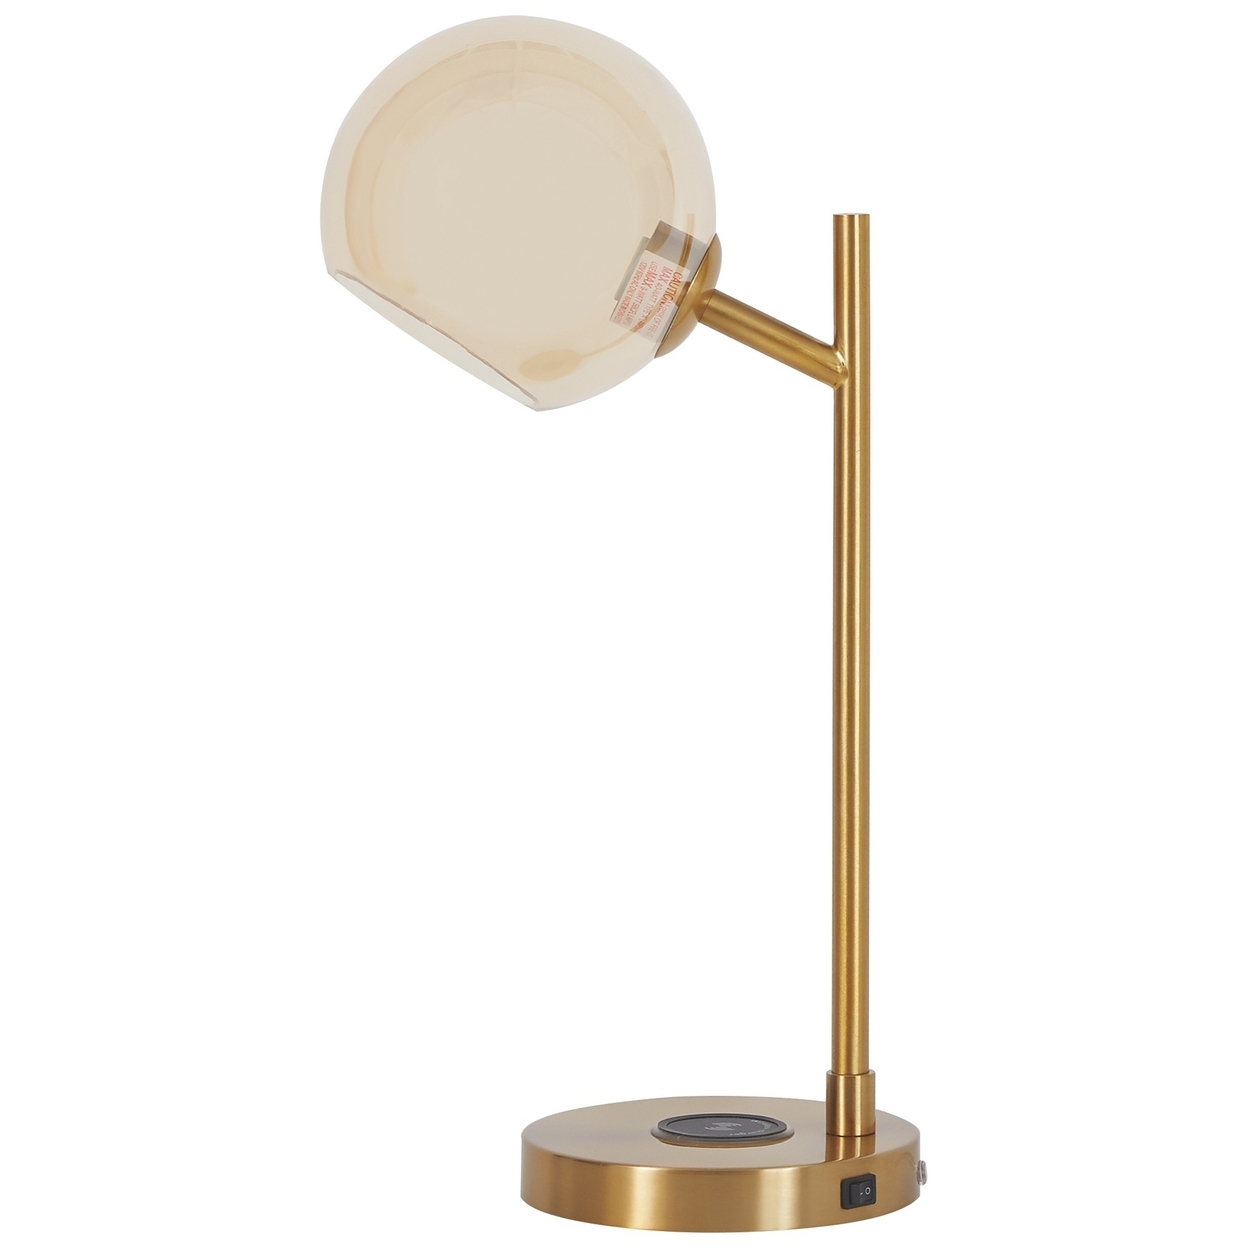 Metal Desk Lamp With Round Glass Shade And Wireless Charger, Gold- Saltoro Sherpi